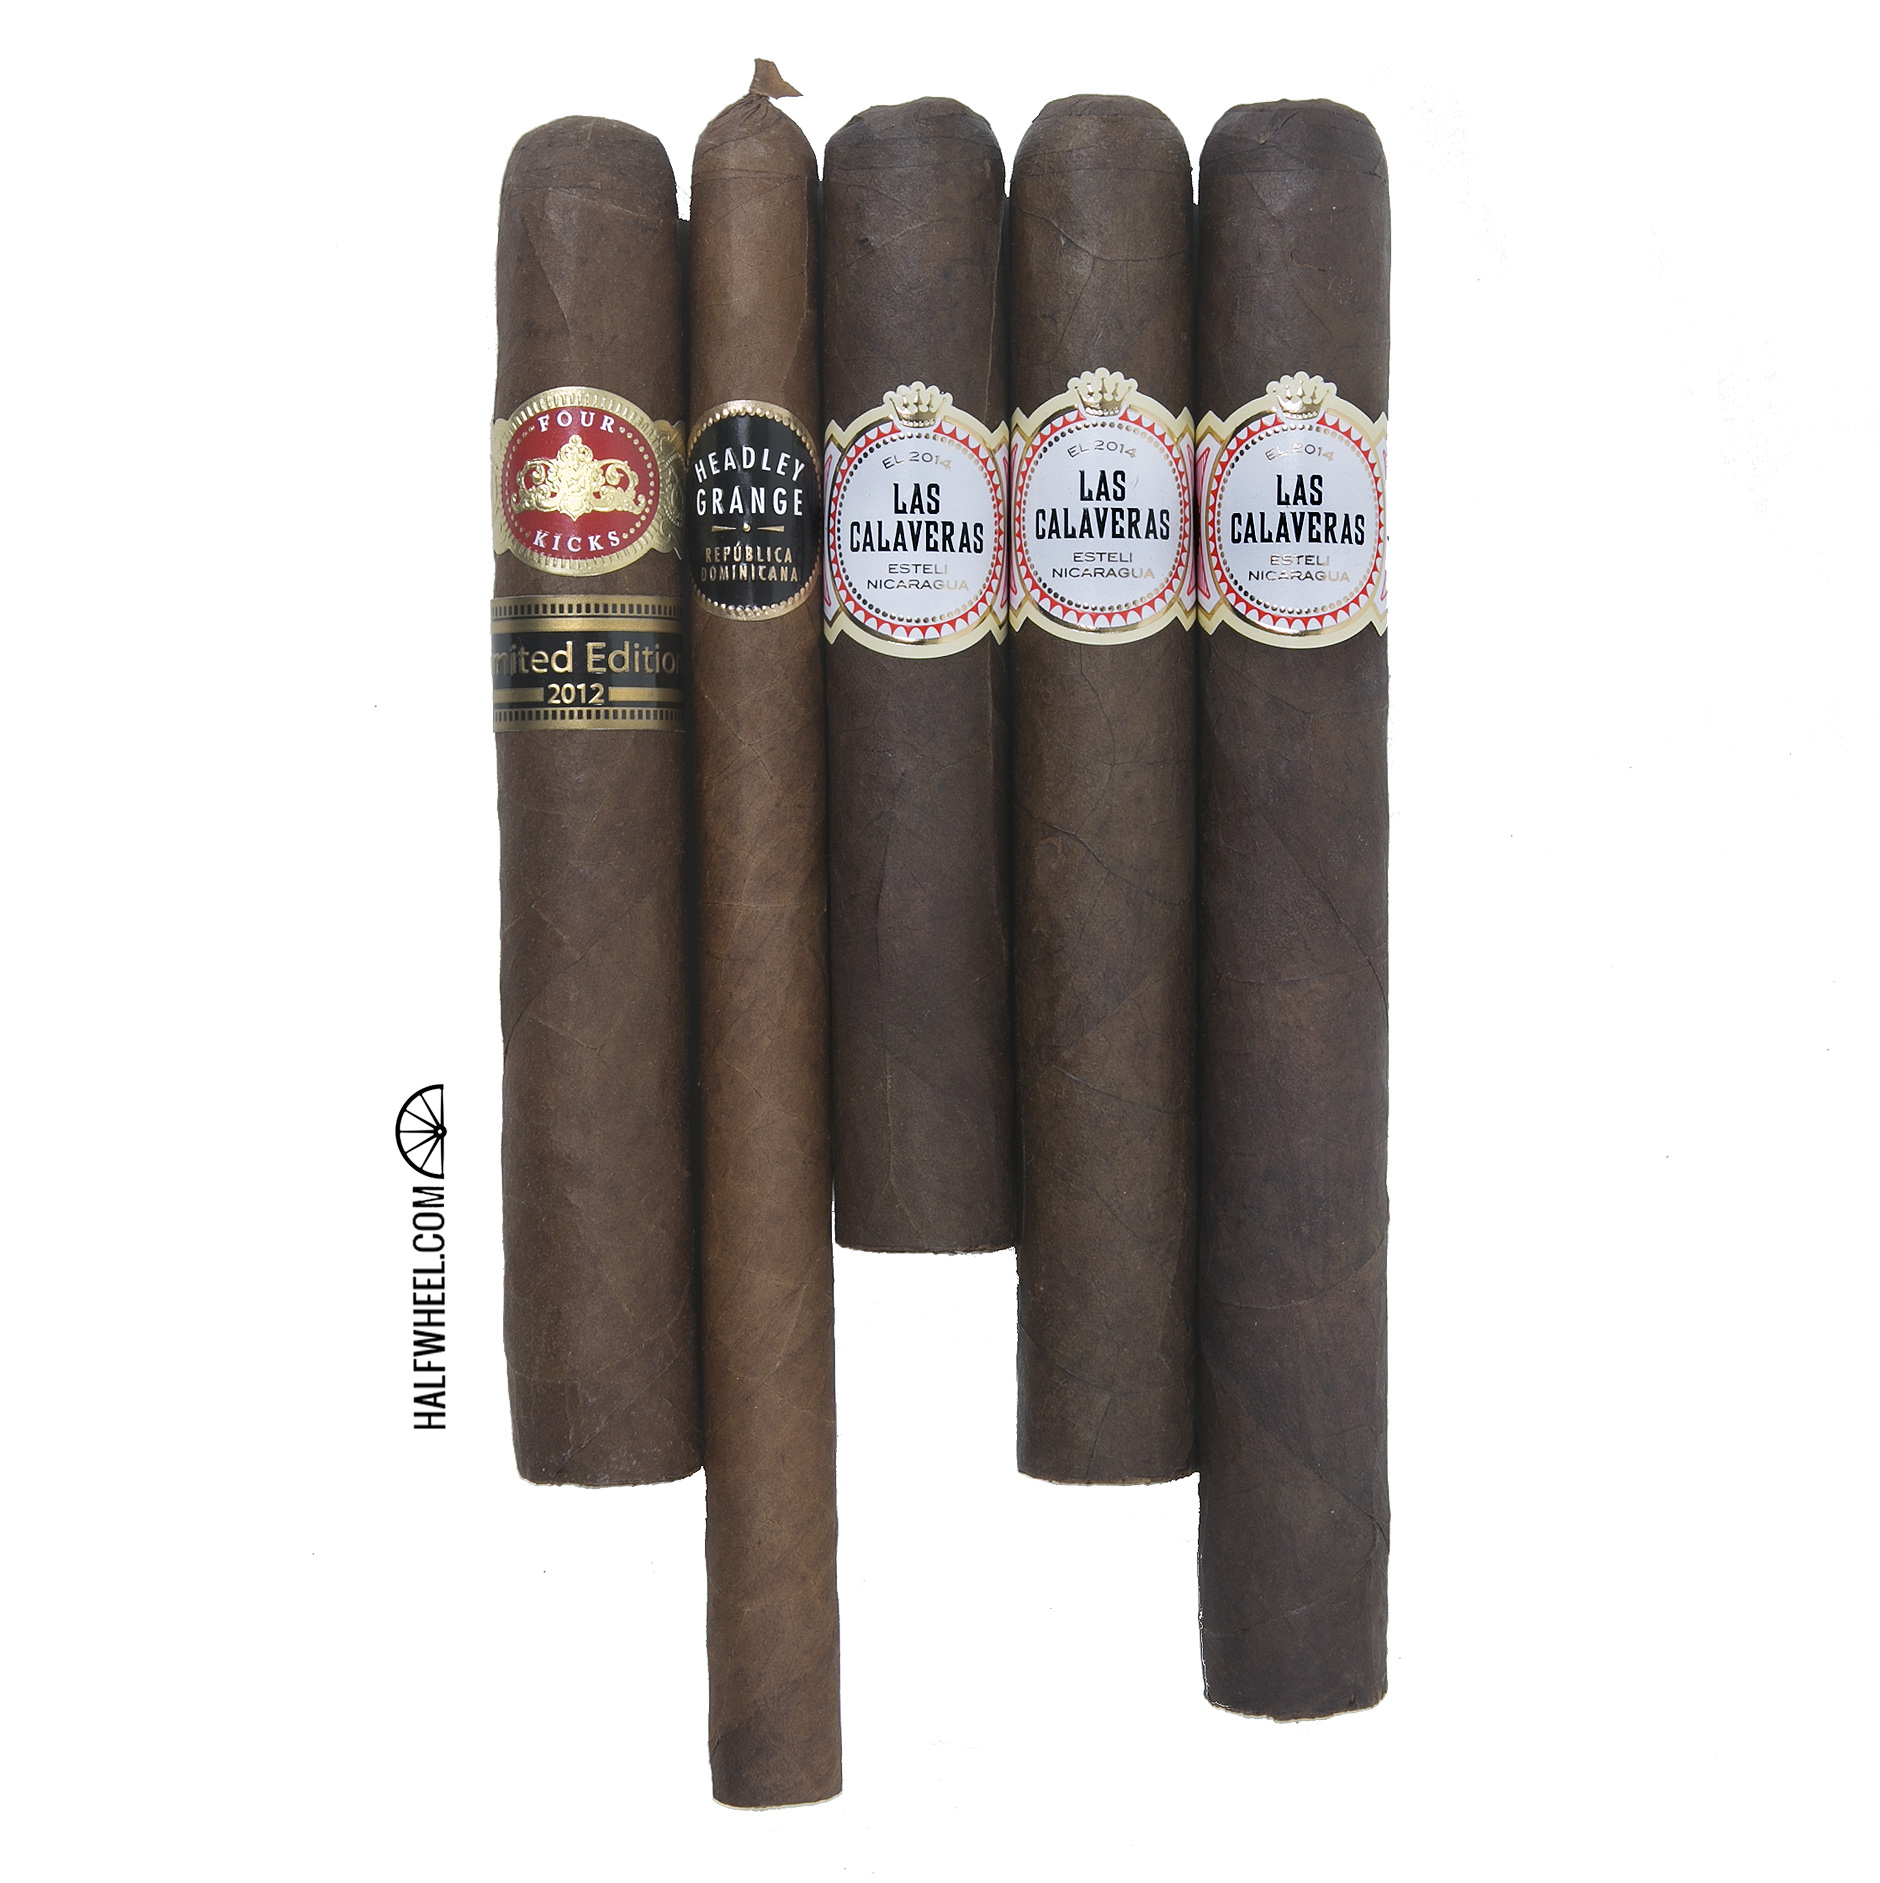 Crowned Heads Limited Editions